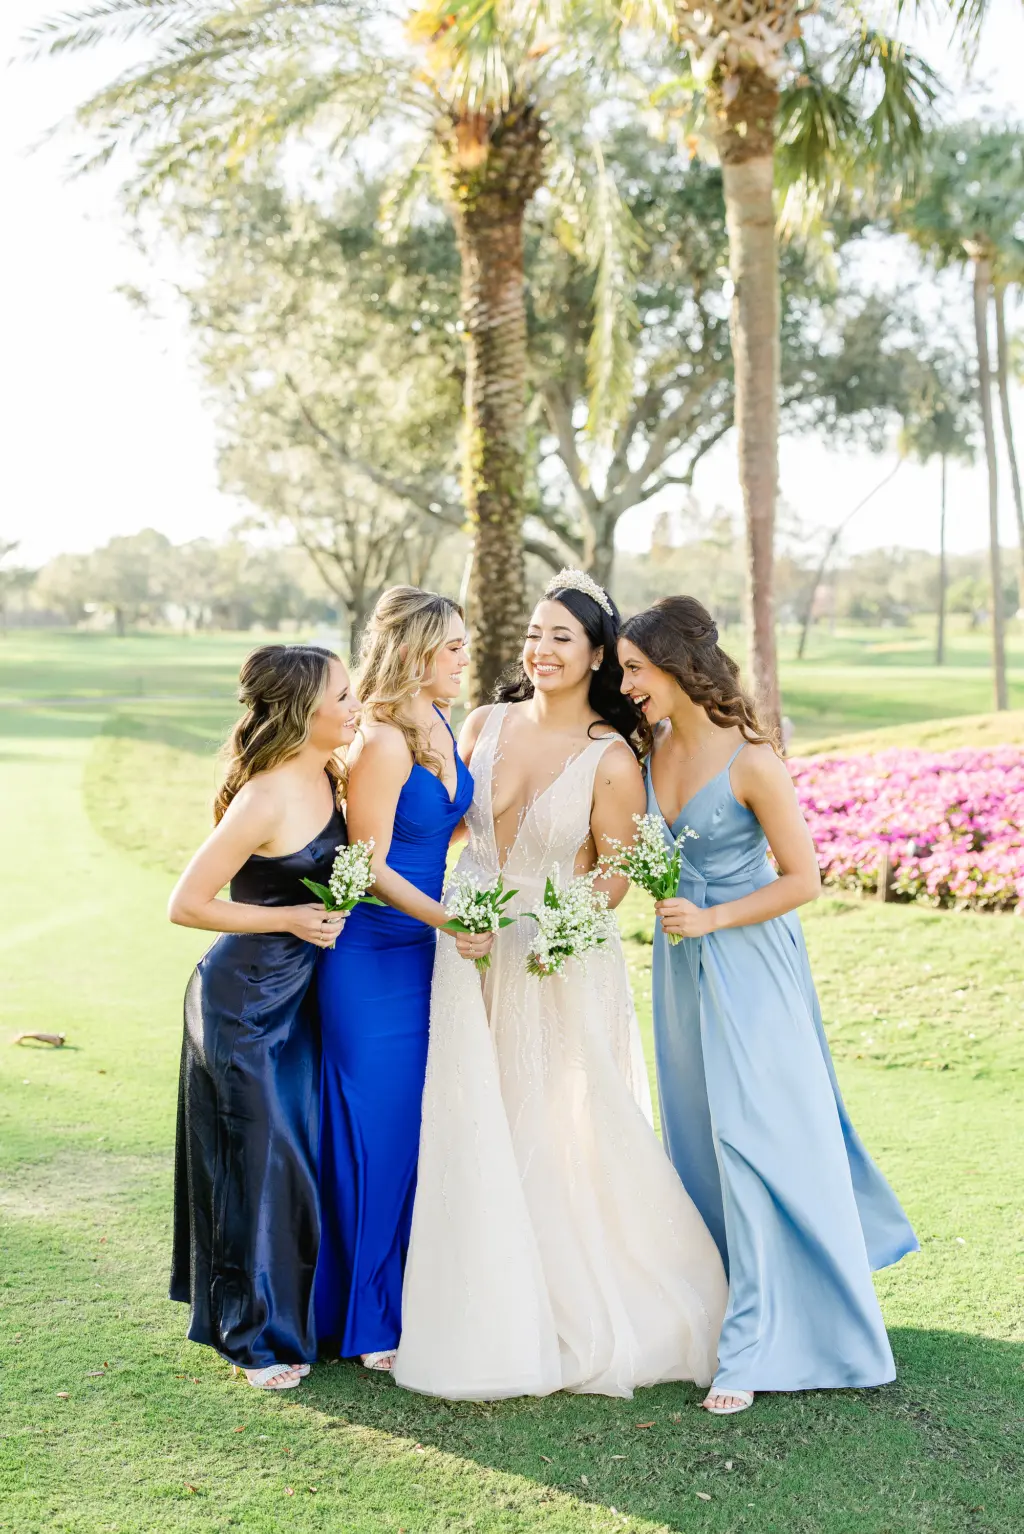 Mismatched Icy Light Blue, Cobalt, and Navy Bridesmaids Dresses | White Plunging Deep V Neckline A-Line Tulle and Sequin Eisen Stein Wedding Dress Ideas